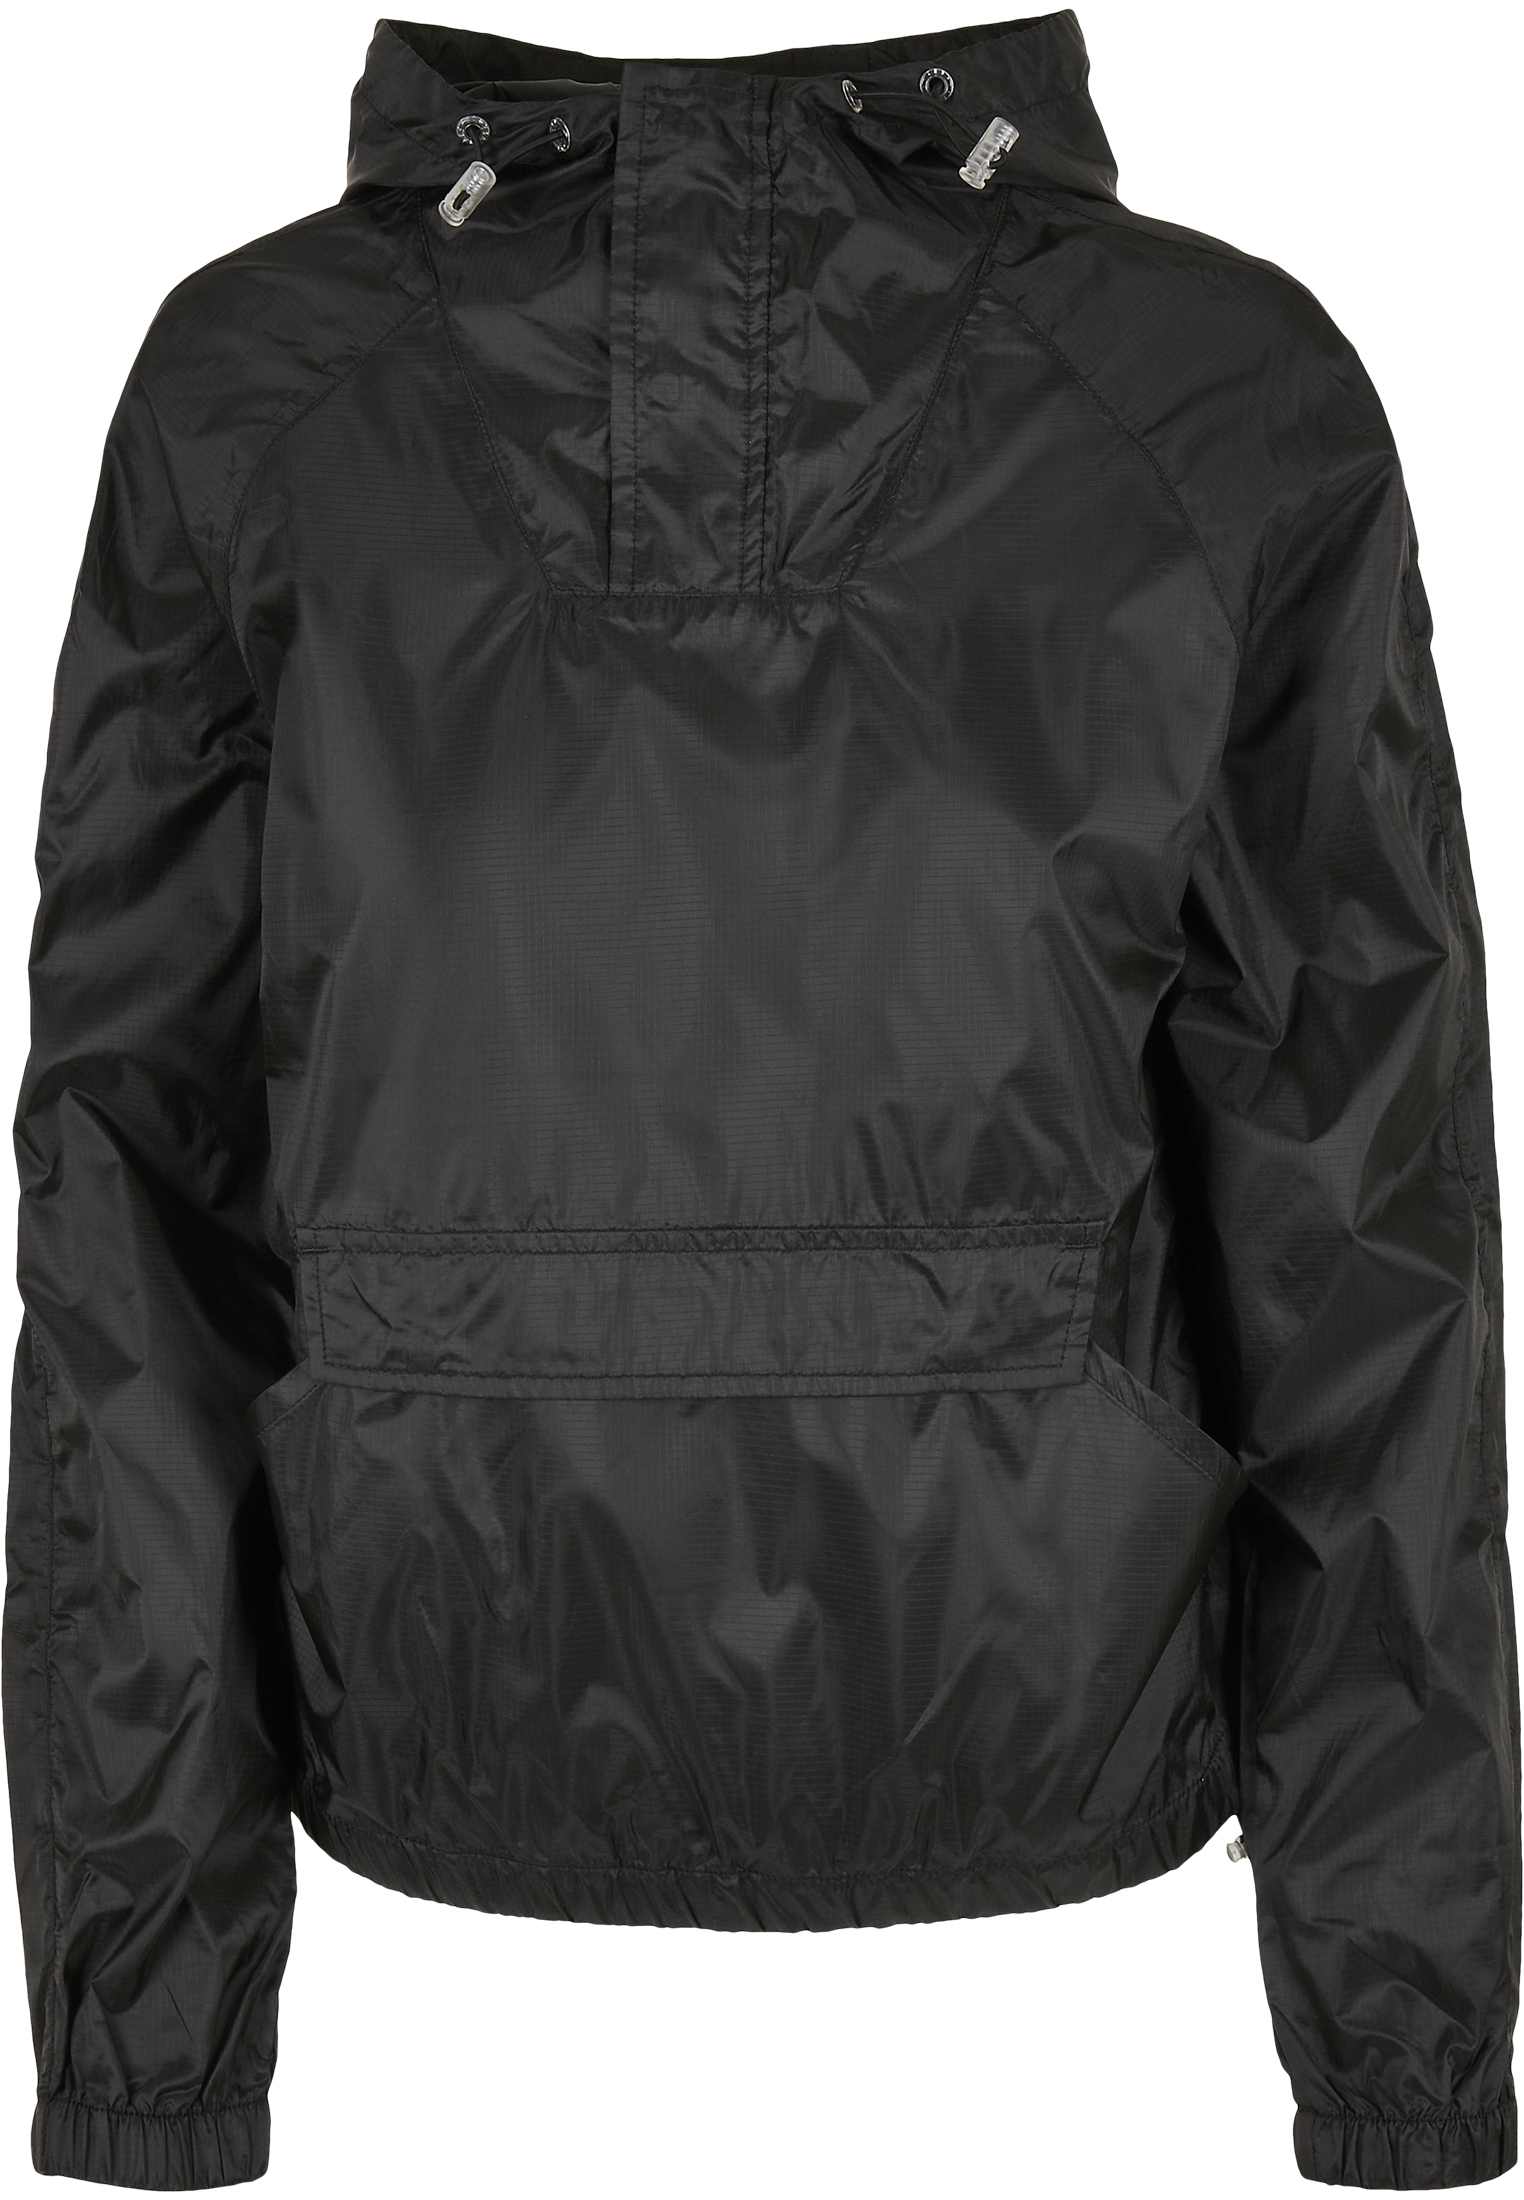 Light Jackets Ladies Transparent Light Pull Over Jacket in Farbe black